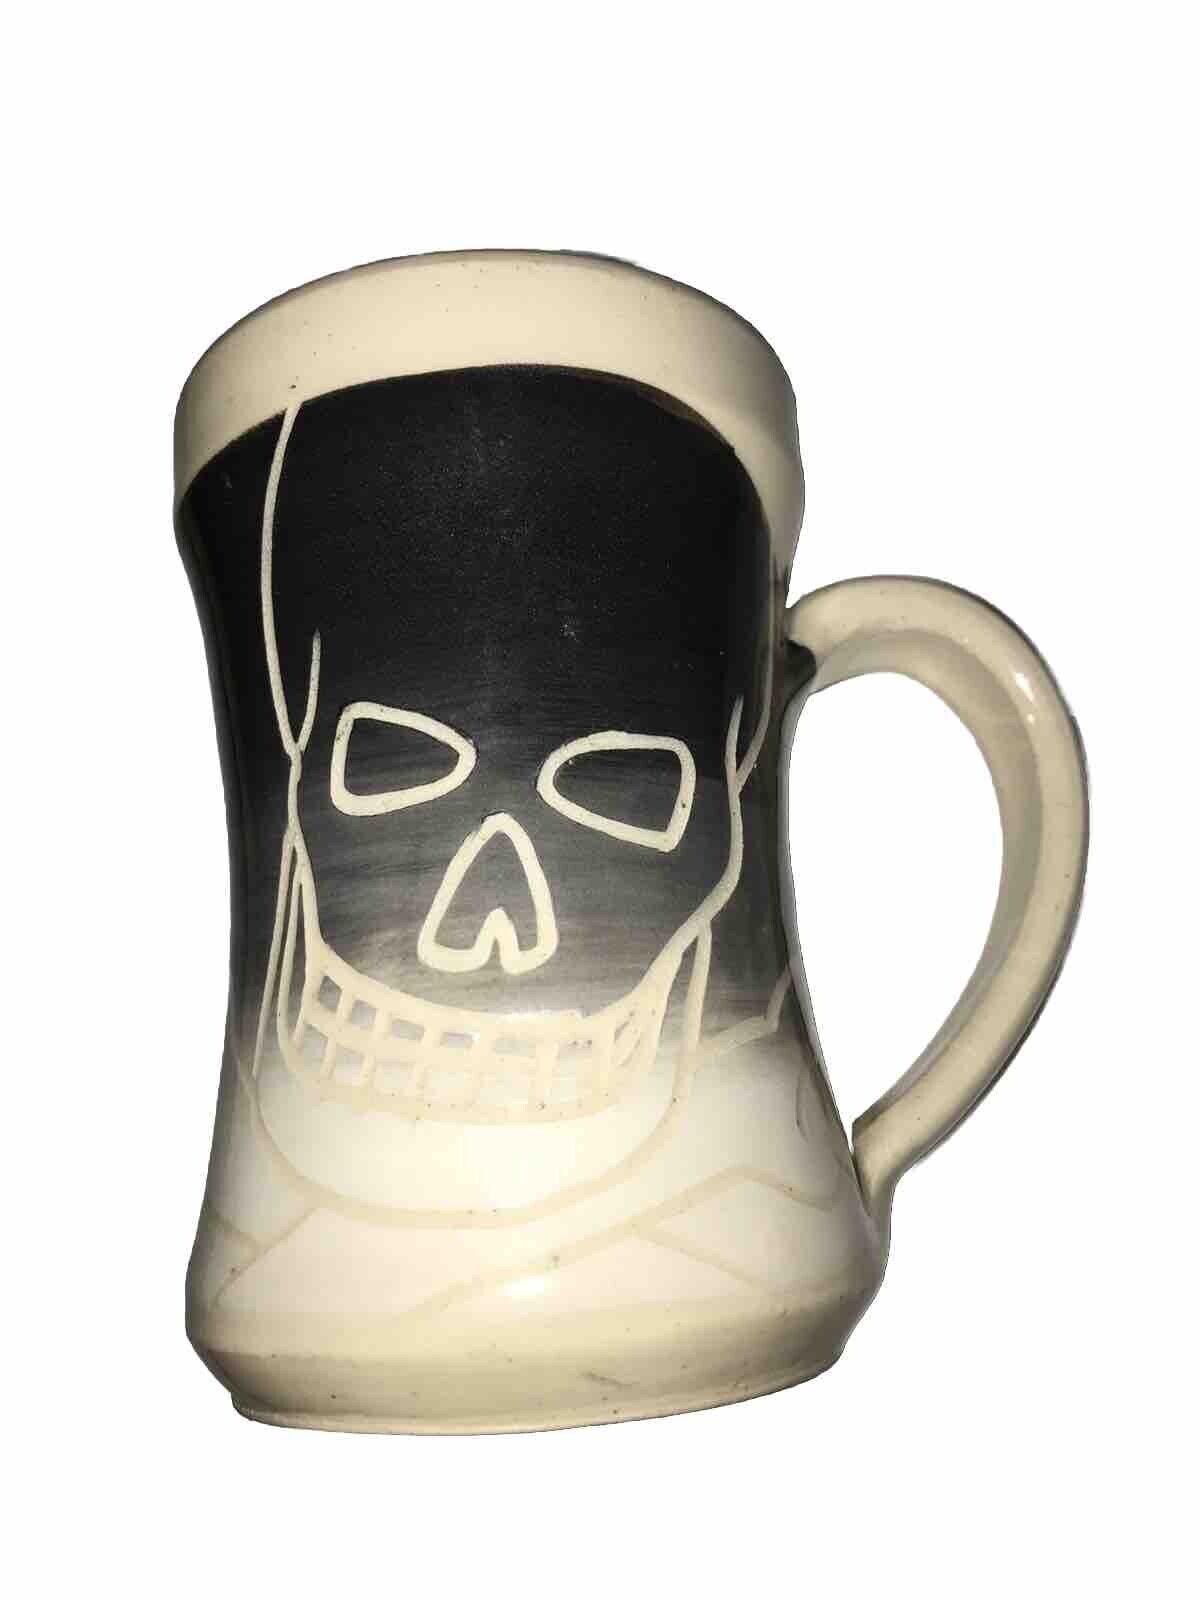 Studio Art Pottery Stamped & Signed  Mug Abstract Skull Cross Bones Unique Cup